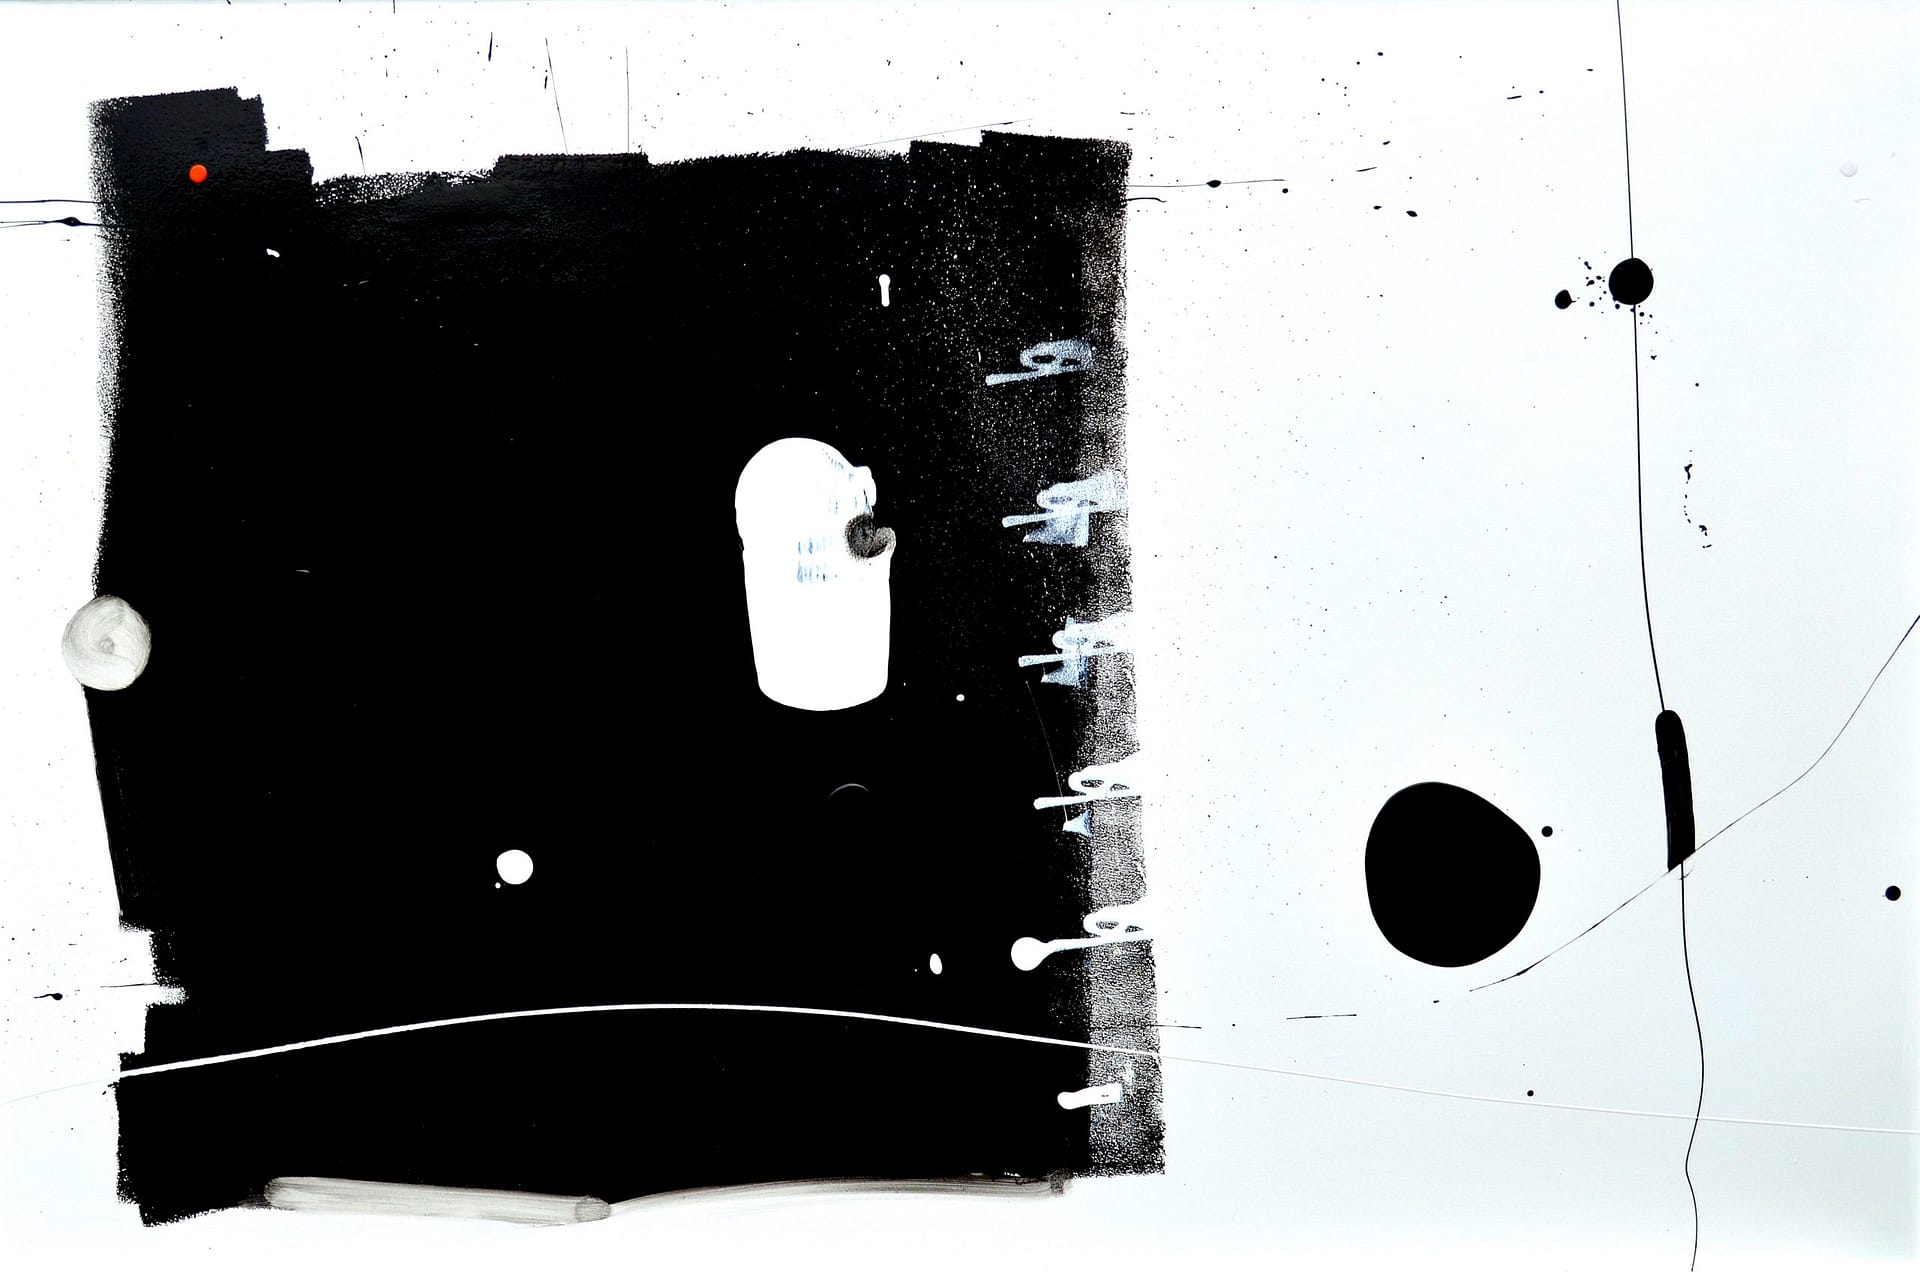 Curious Big Black Square Running Away from Black Blob Over There Painting anthony hunter